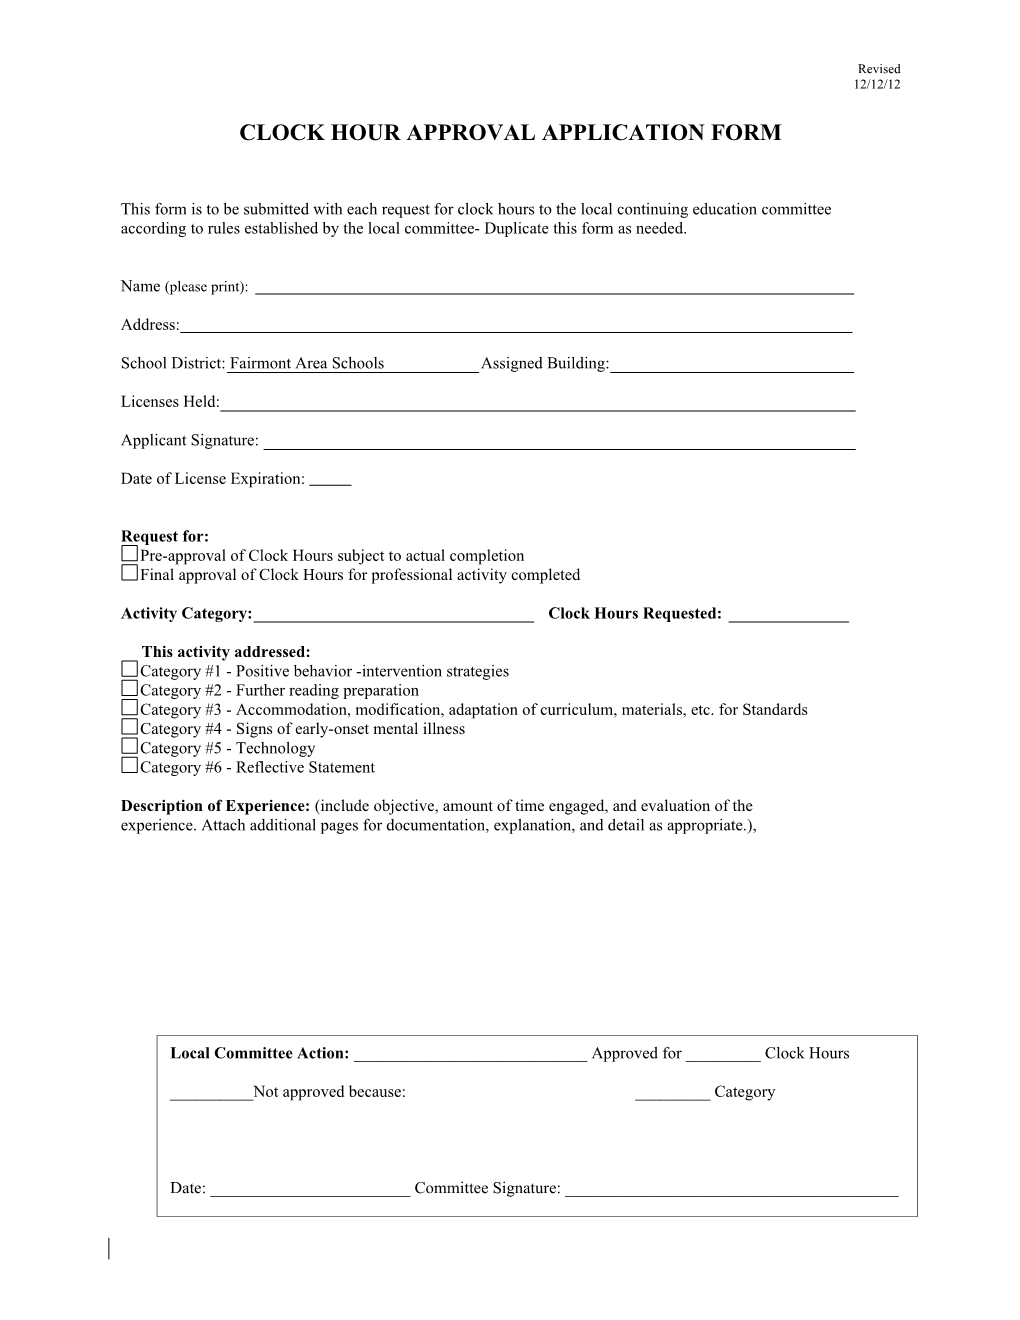 Clock Hour Approval Application Form